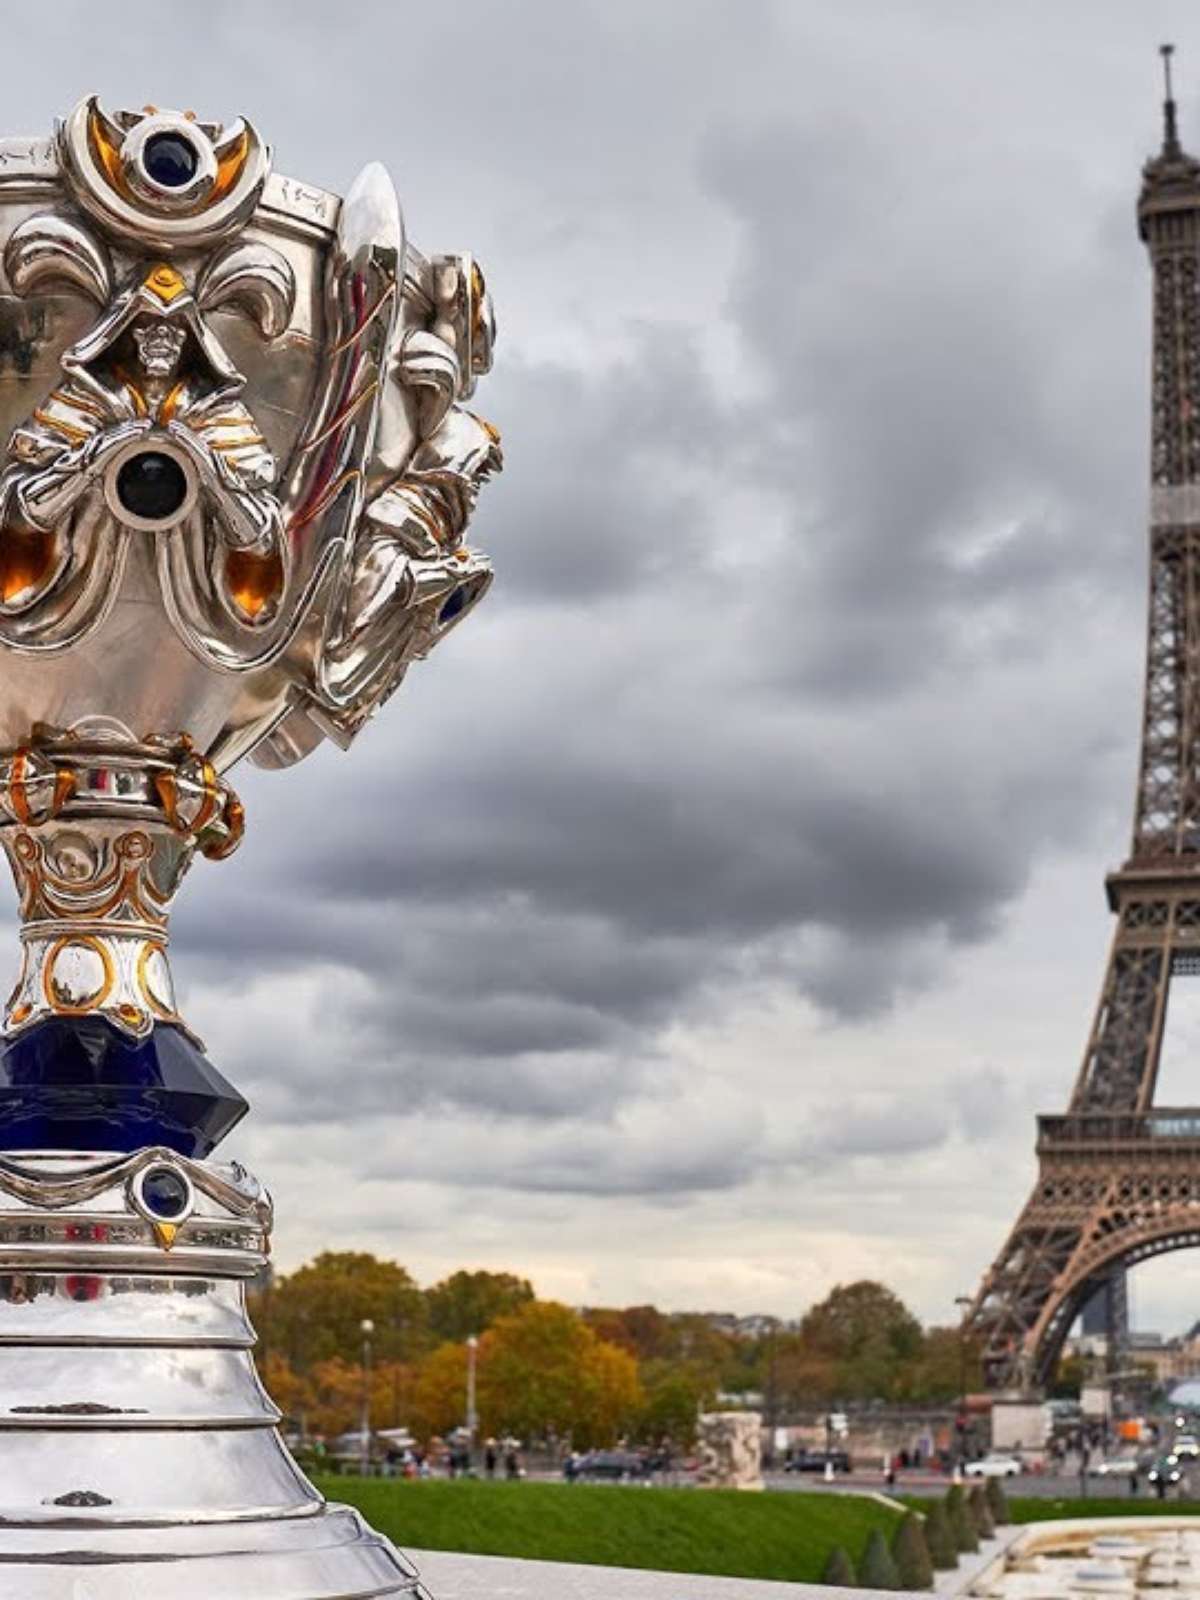 League of Legends Worlds 2019 trophy at the Eiffel Tower